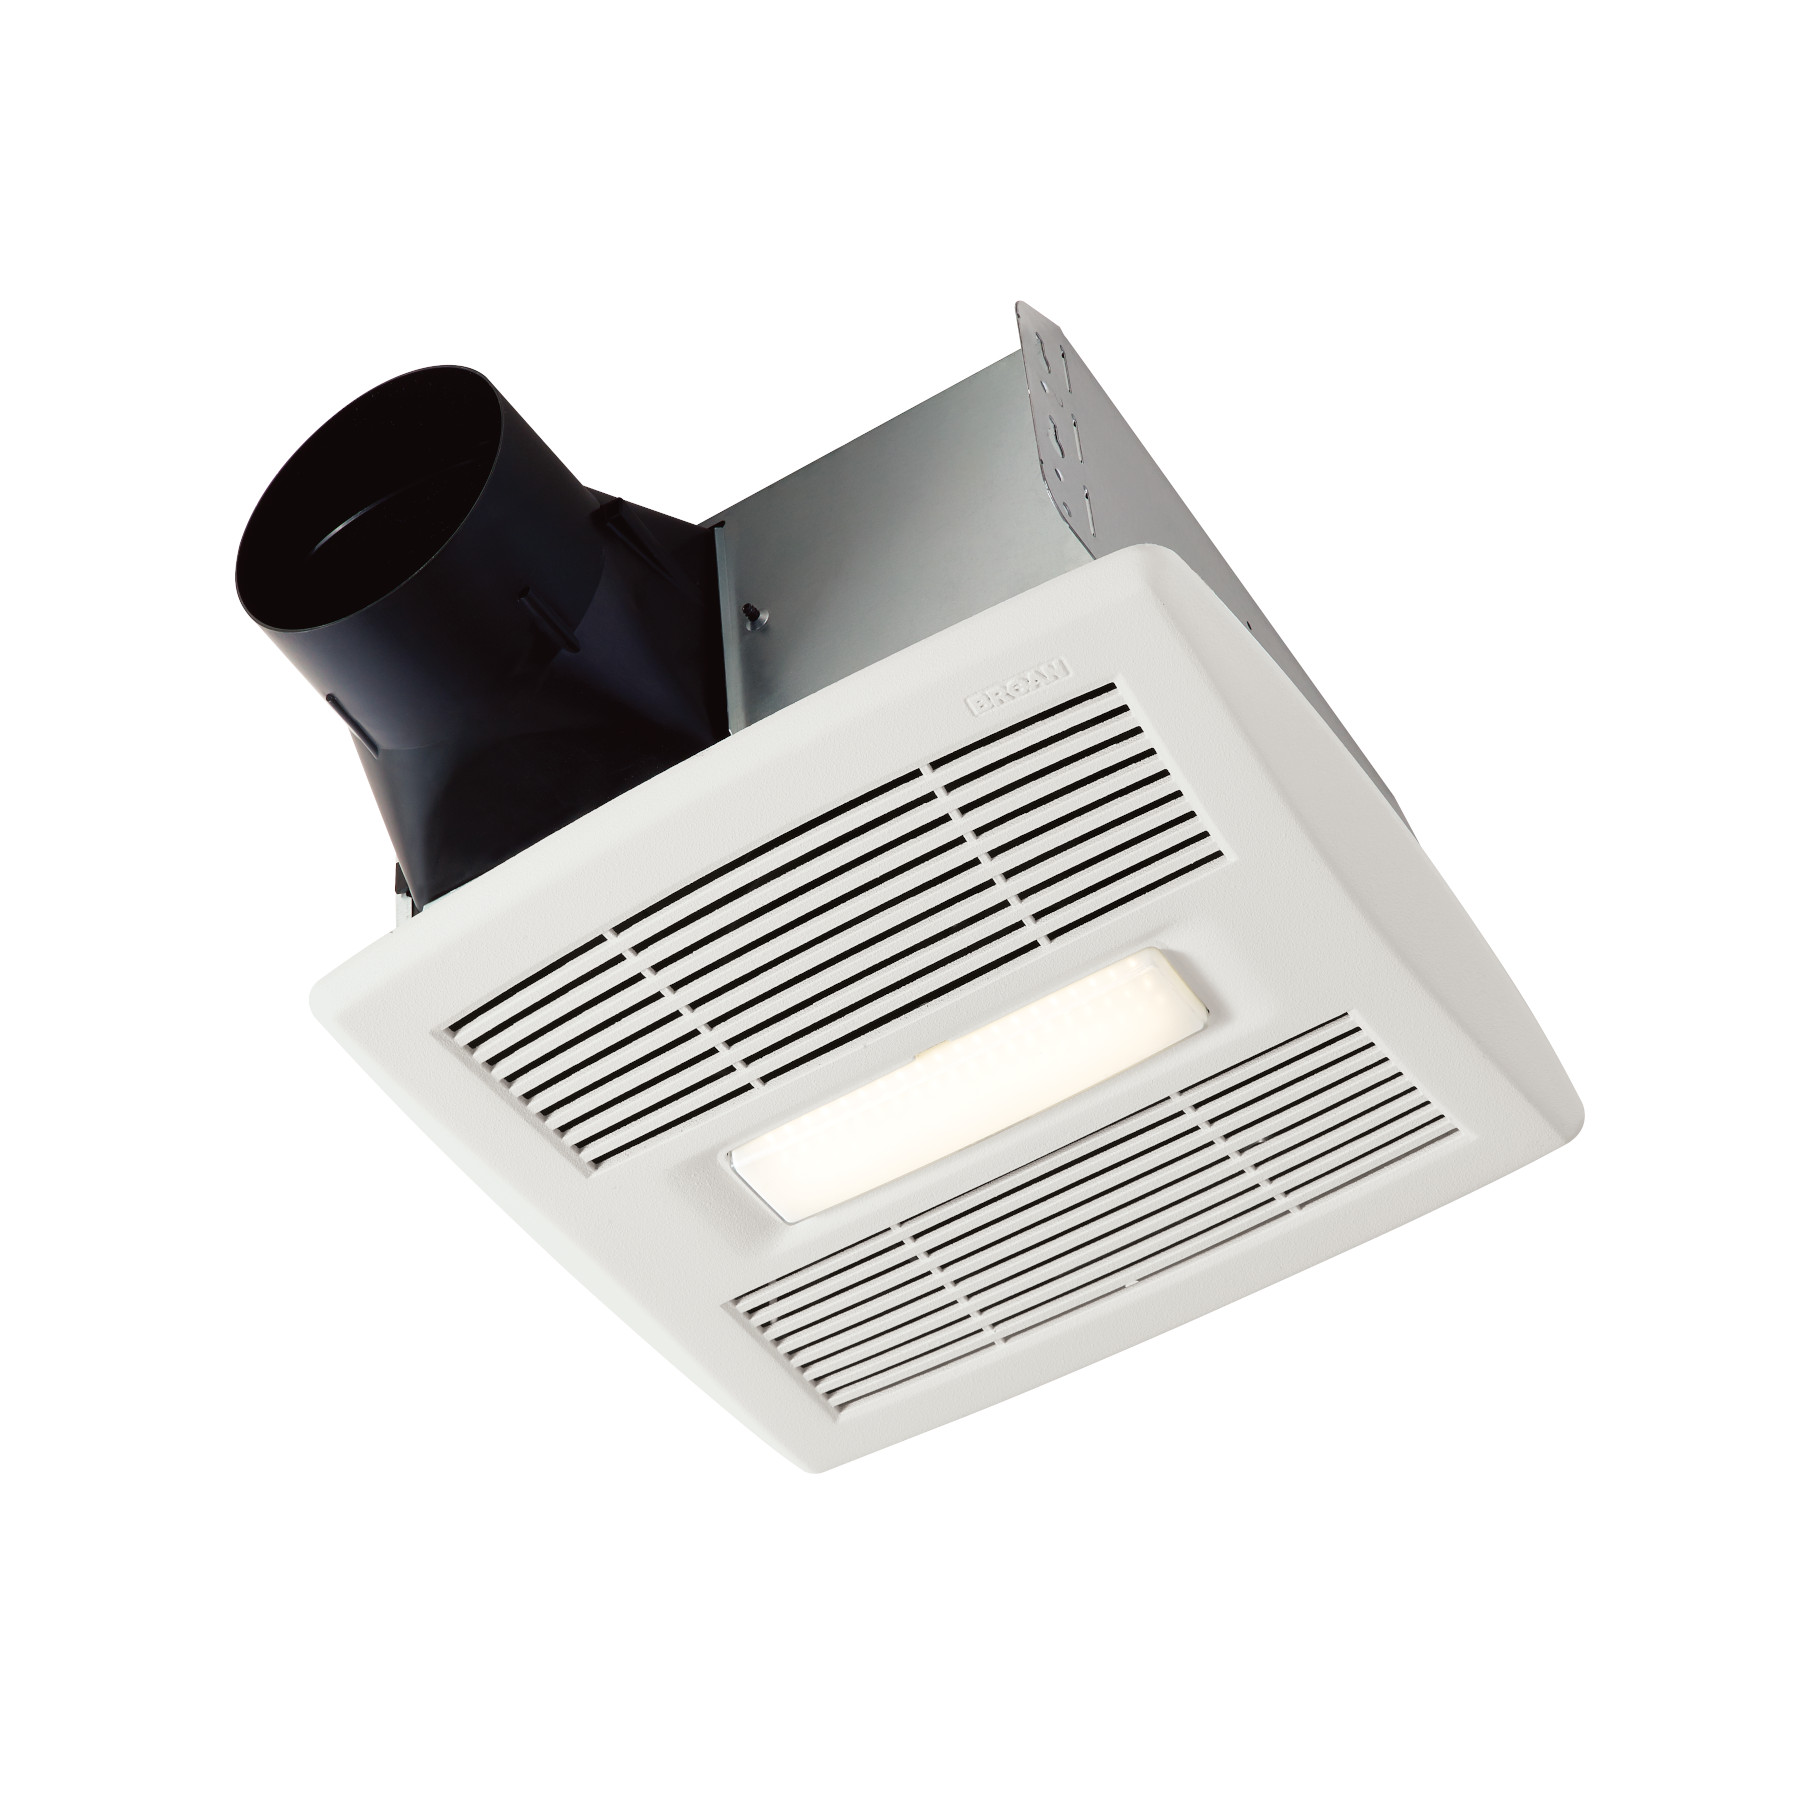 **DISCONTINUED** Broan® 80 CFM Ventilation Fan with LED Light, 0.8 Sones; ENERGY STAR Certified